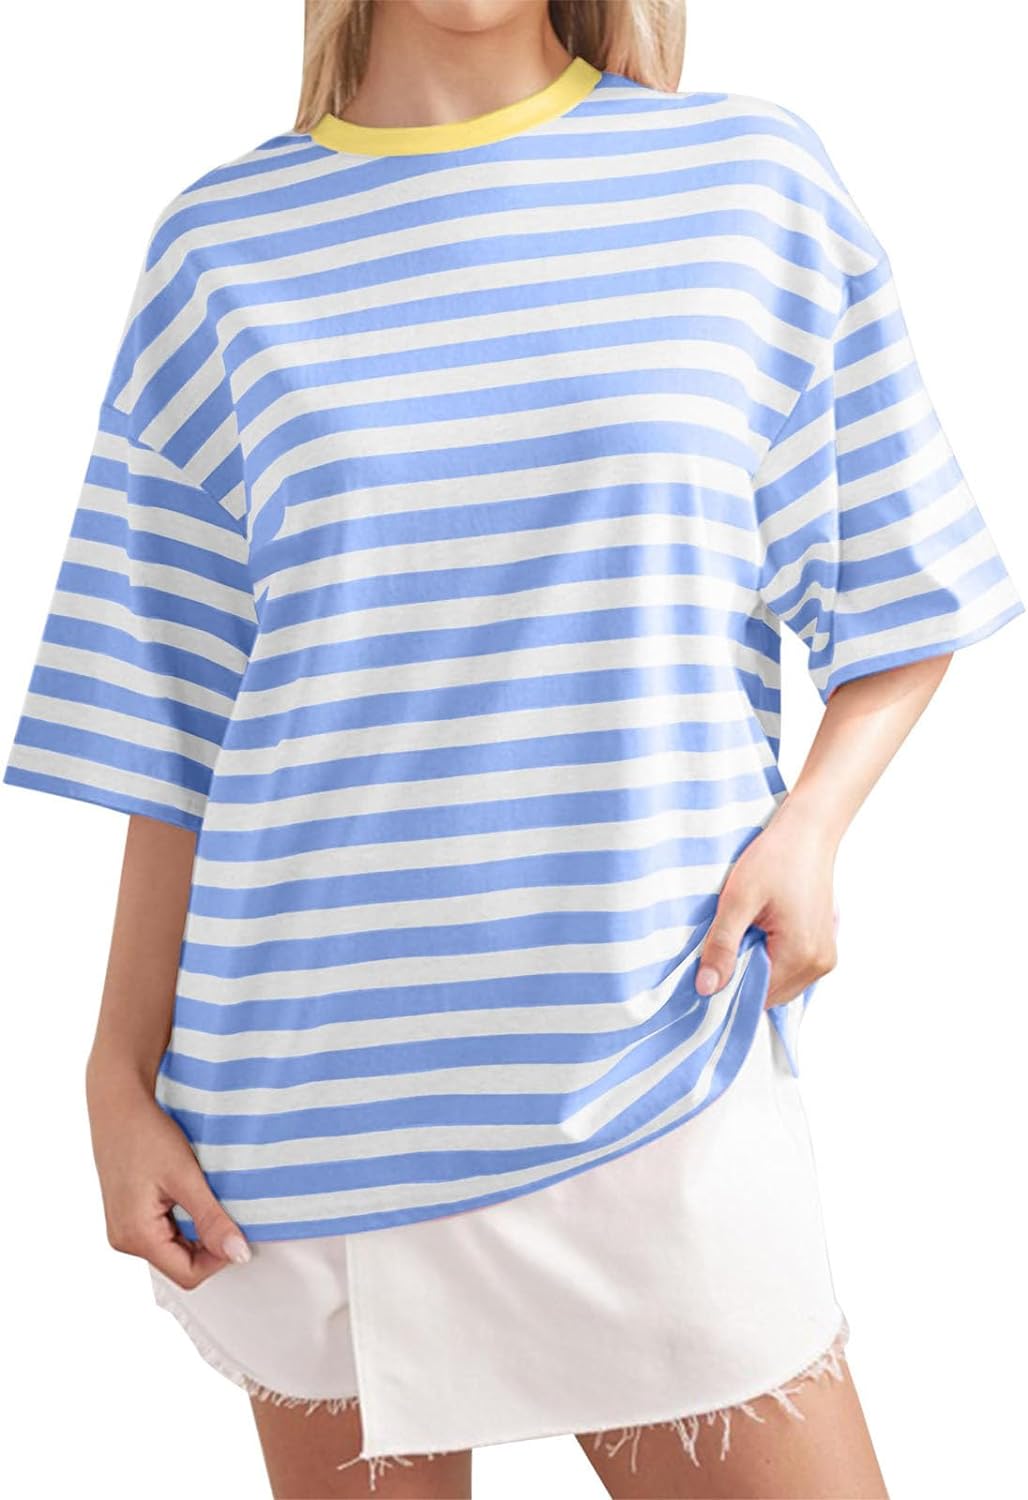 Women Oversized Striped Color Block Shirt Short Sleeve Crew Neck T-Shirts Casual Loose Pullover Tops Summer Tee Tops